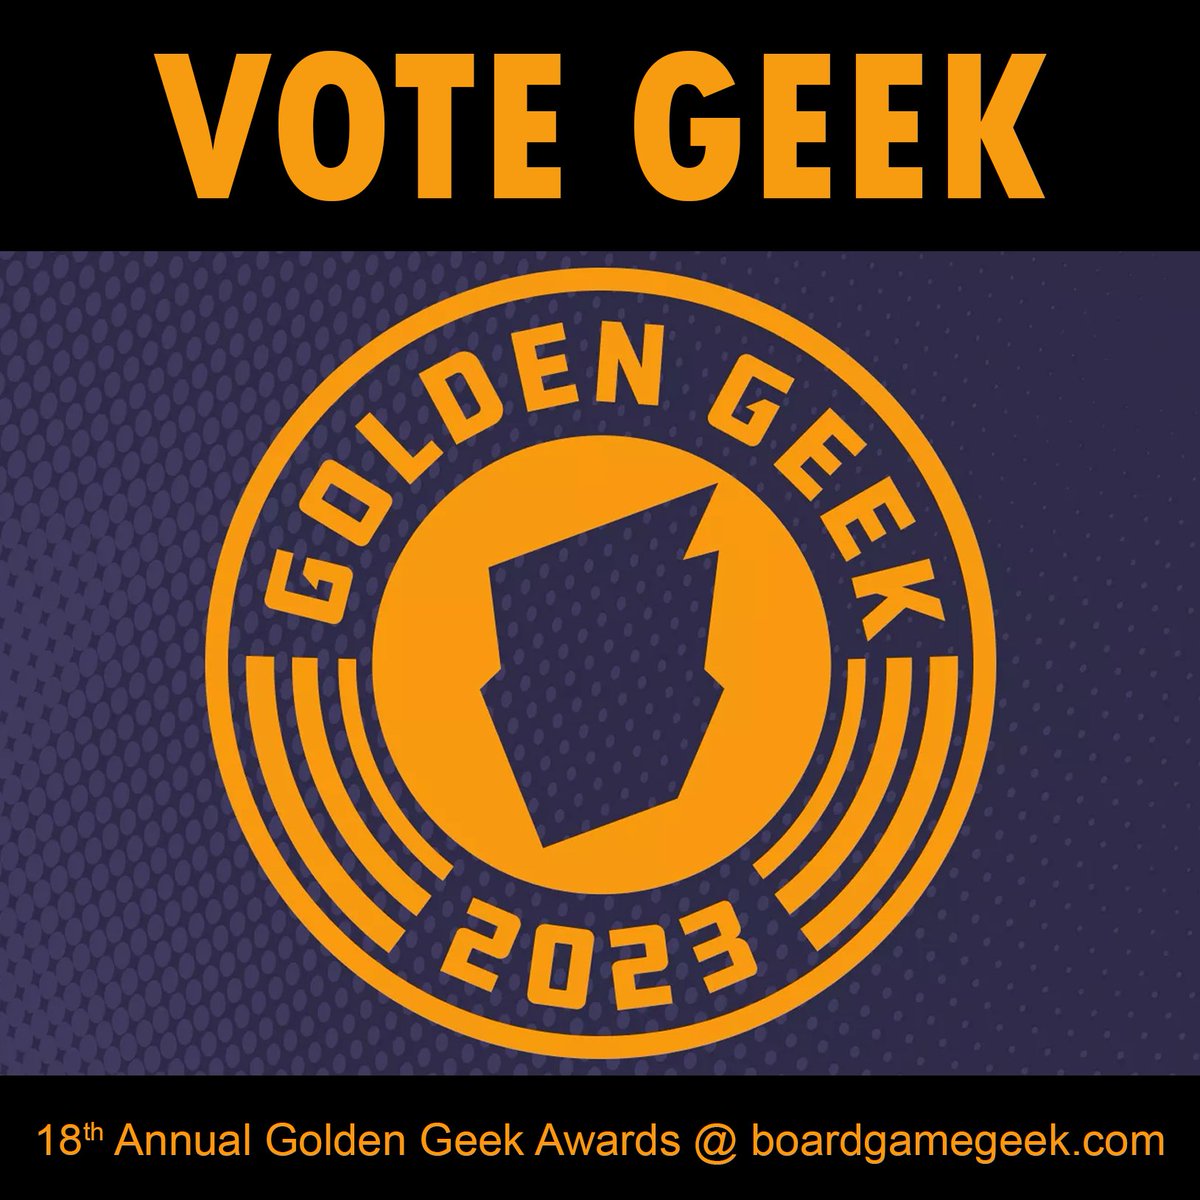 VOTE GEEK in the 18th Annual Golden Geek Awards! 🤓🏆 There are so many great games to rank, perhaps even a 'spirited' one or two ;) 🥃🎲 #goldengeek #distilled #distilledgame #paversongames #whiskey #whisky #bourbon #boardgaming #boardgames #bgg #boardgamegeek #boardgame #geek